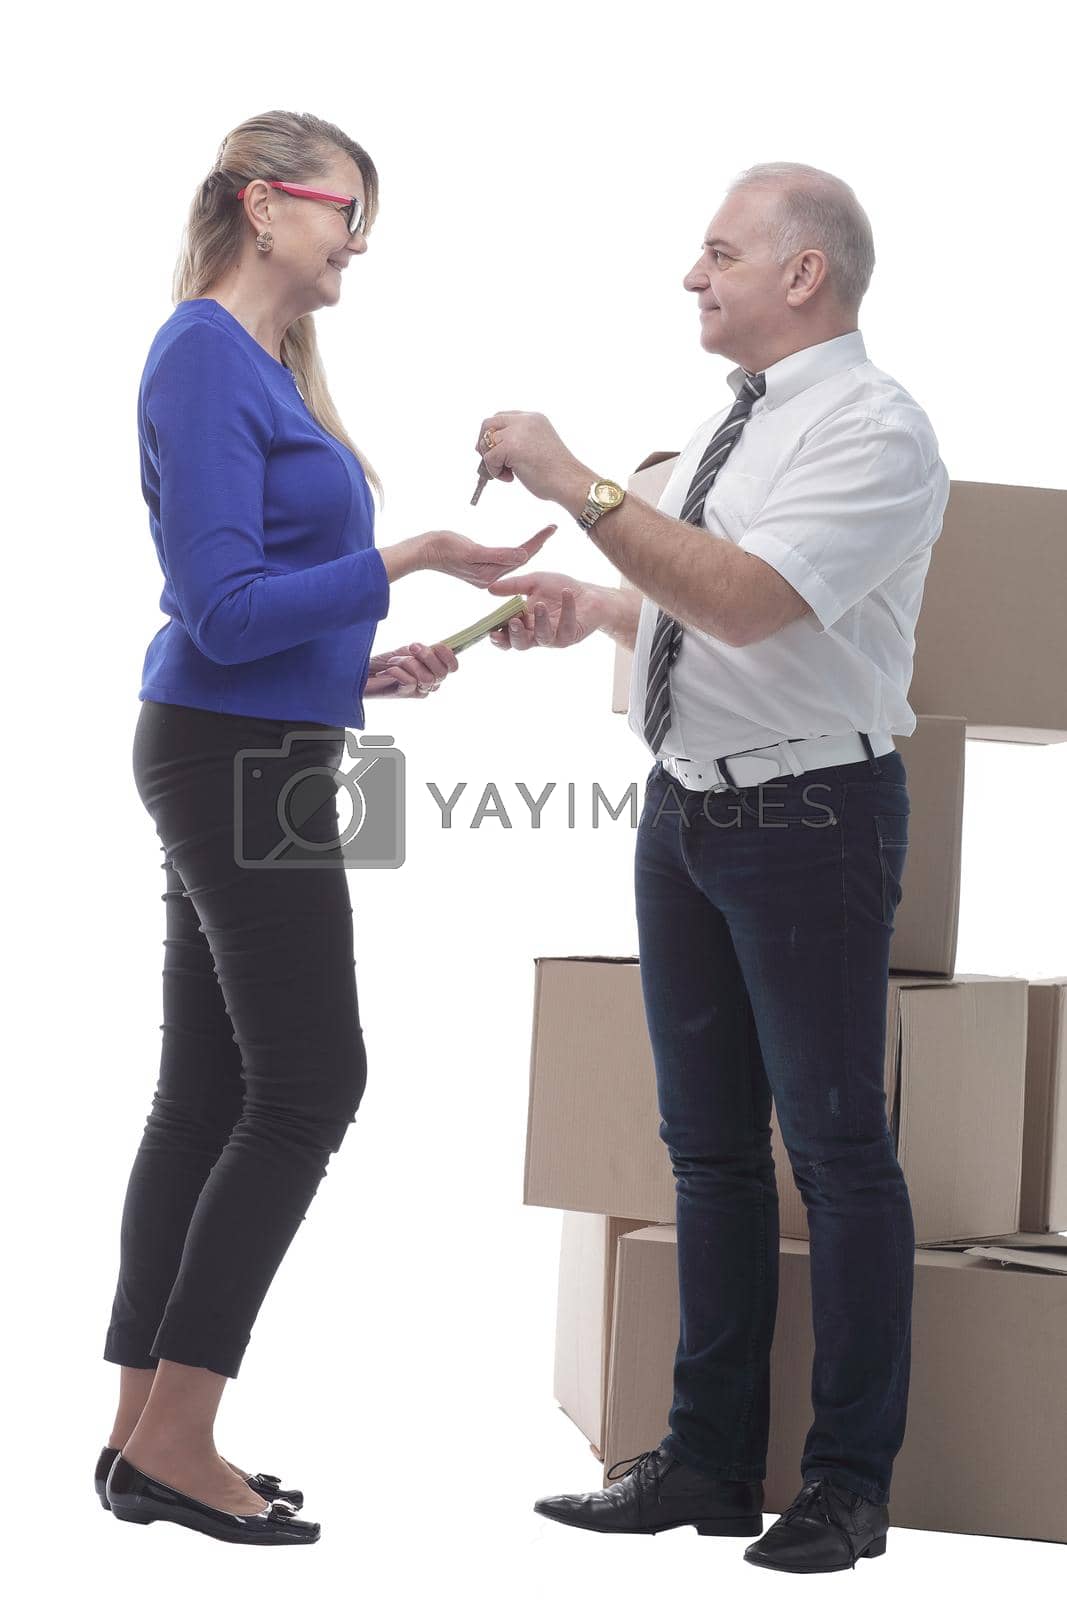 Royalty free image of in full growth. real estate agent handing keys to a happy buyer by asdf